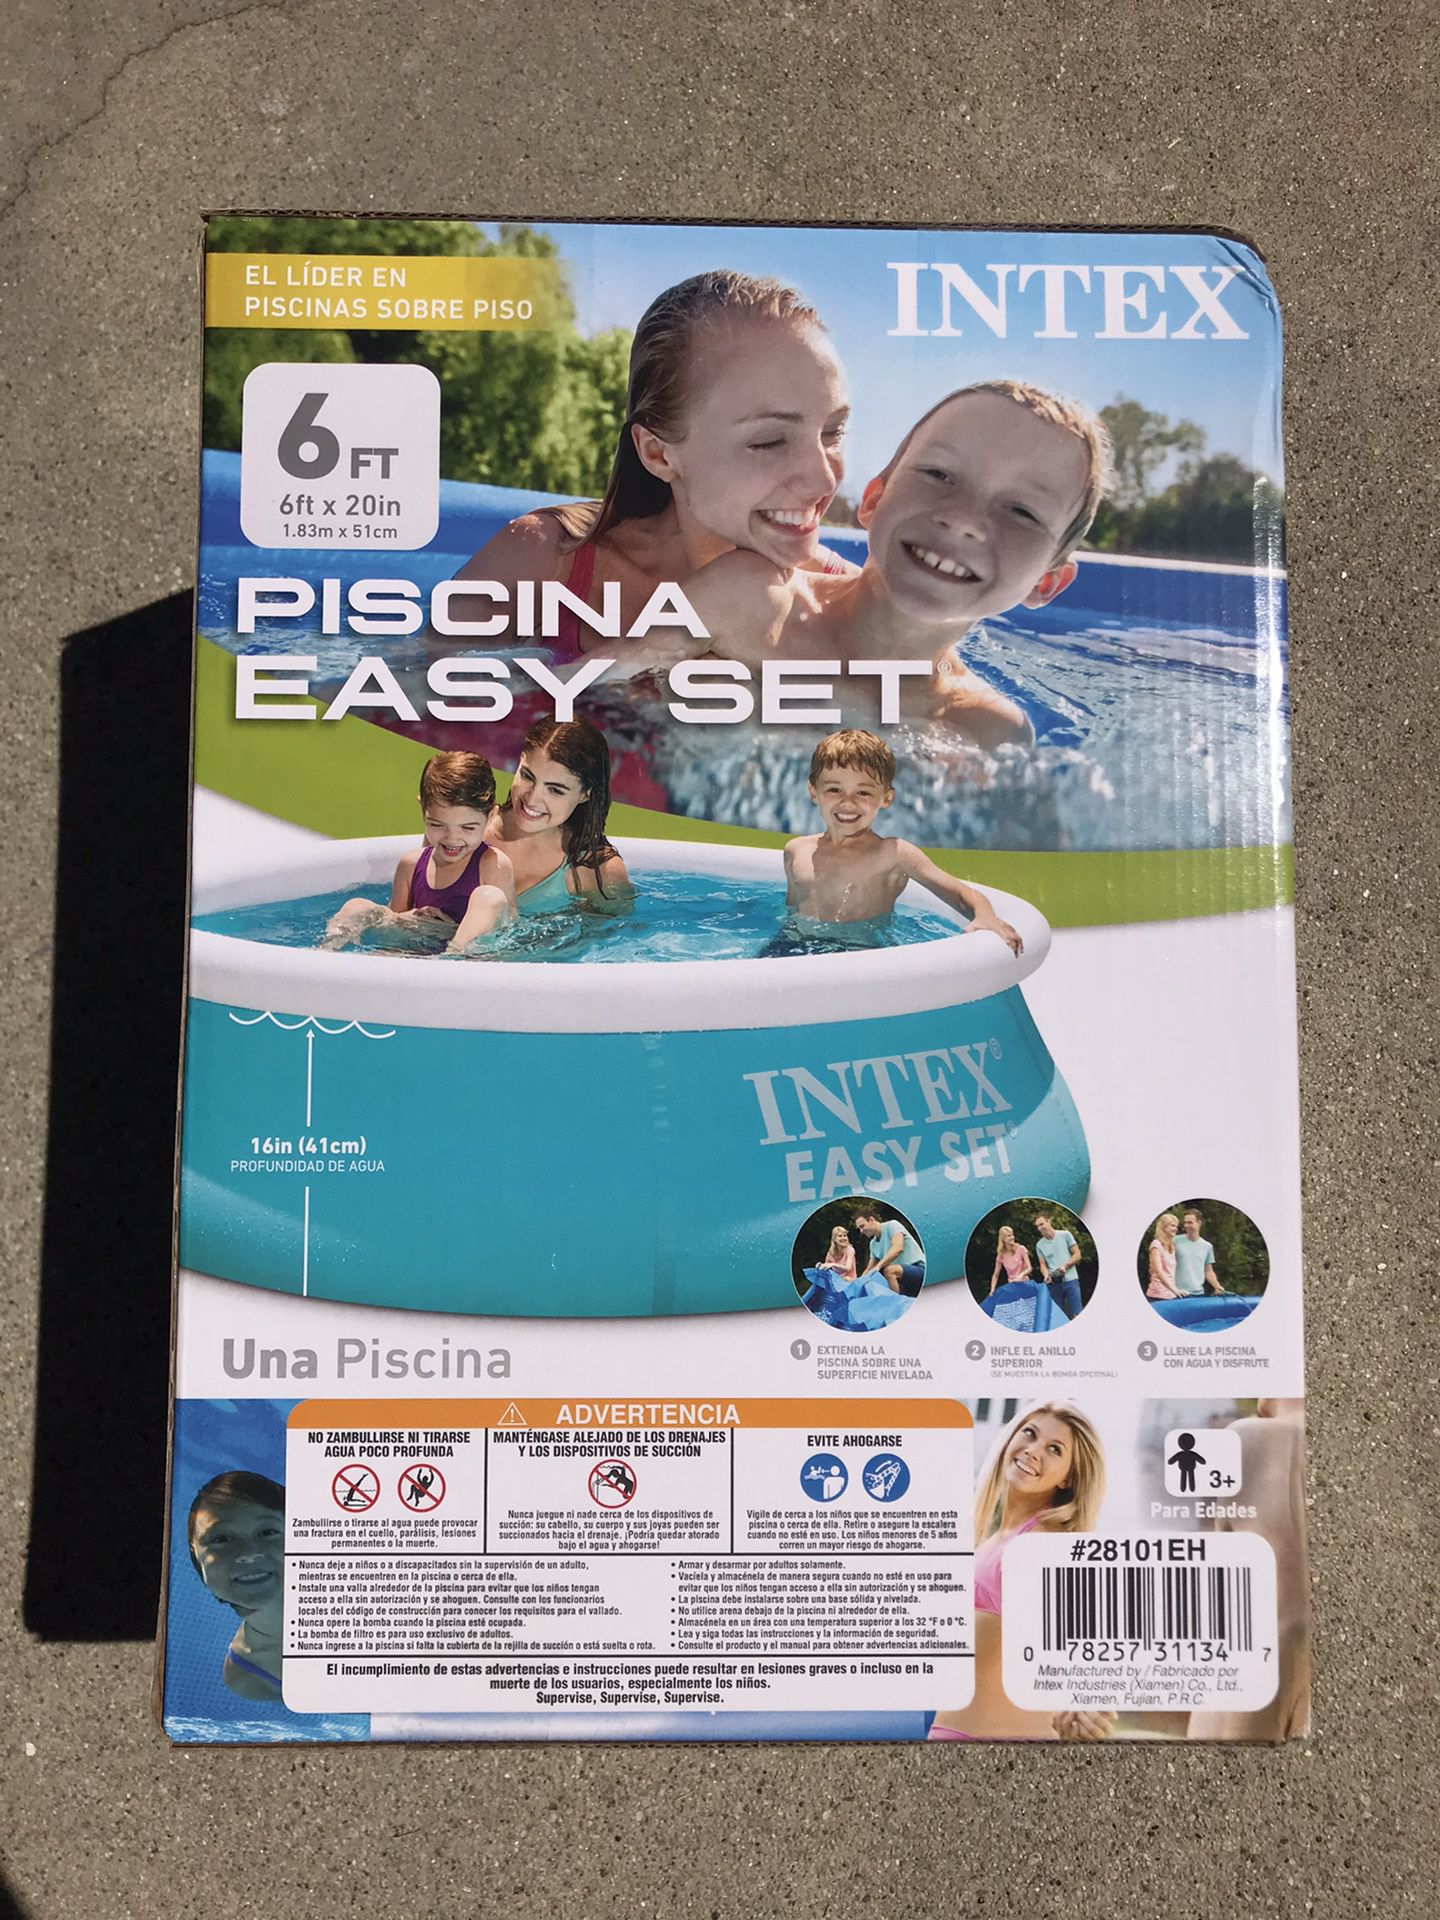 NEW Intex 6ft Easy Set Inflatable Pool